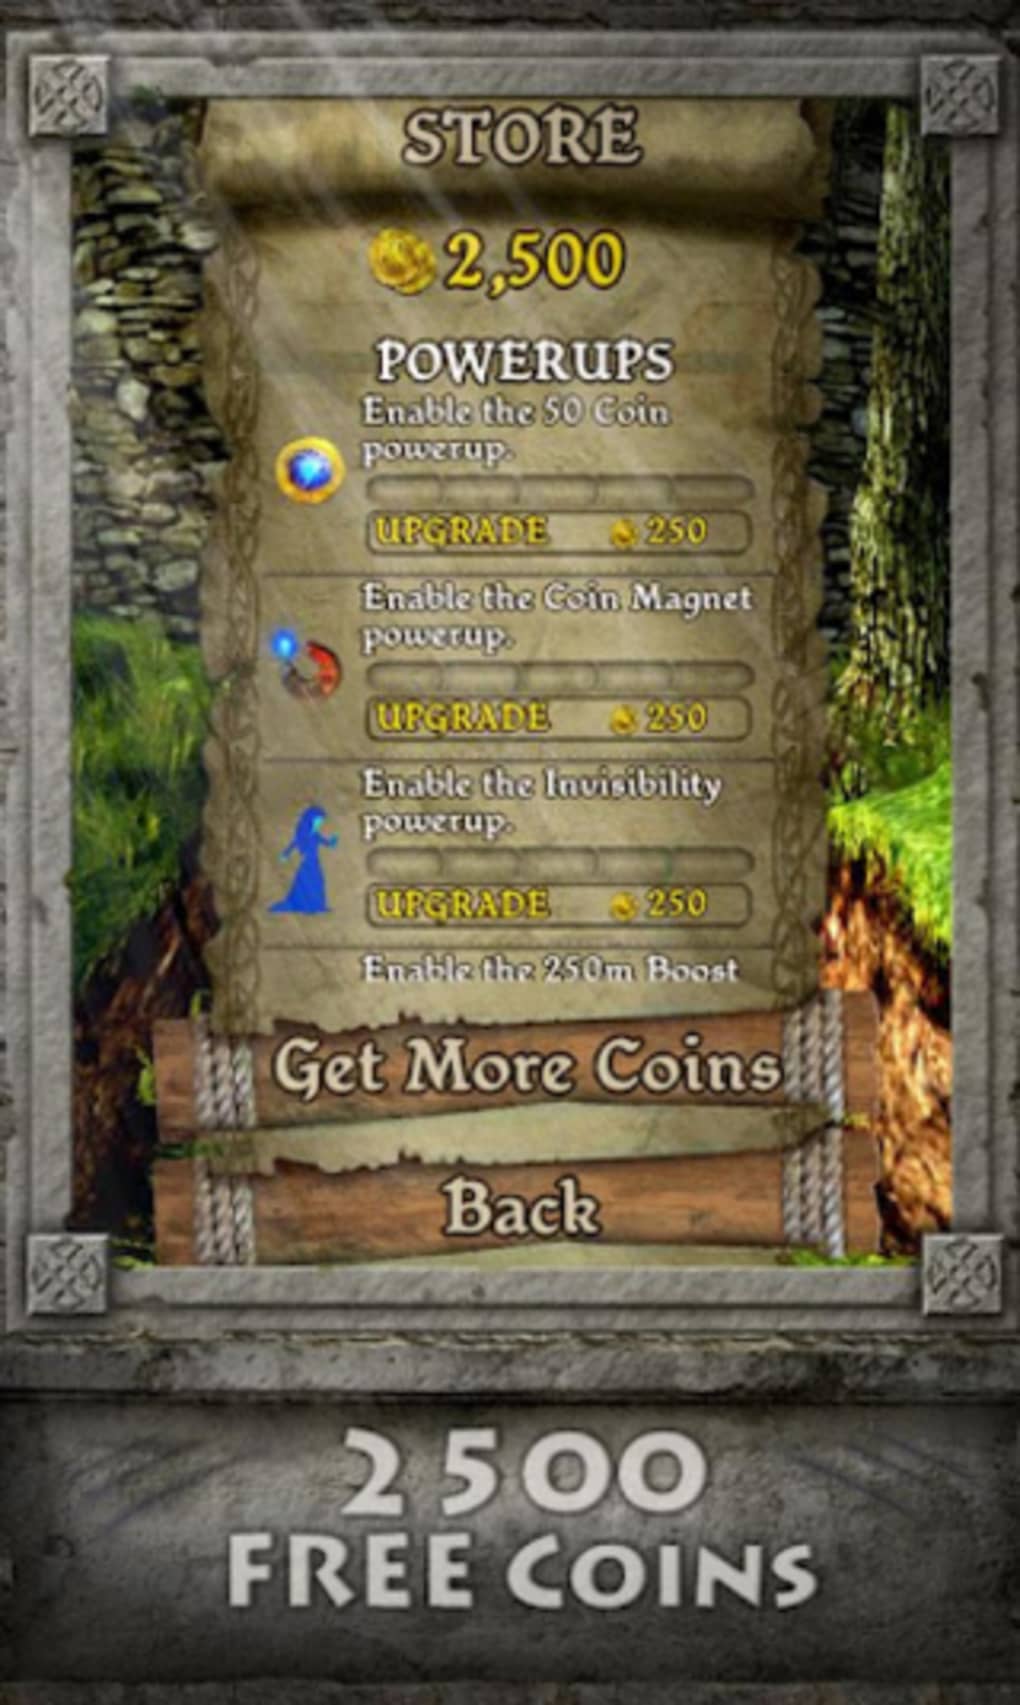 Temple Run Free Review and Download on App Stores – Tech Wellness